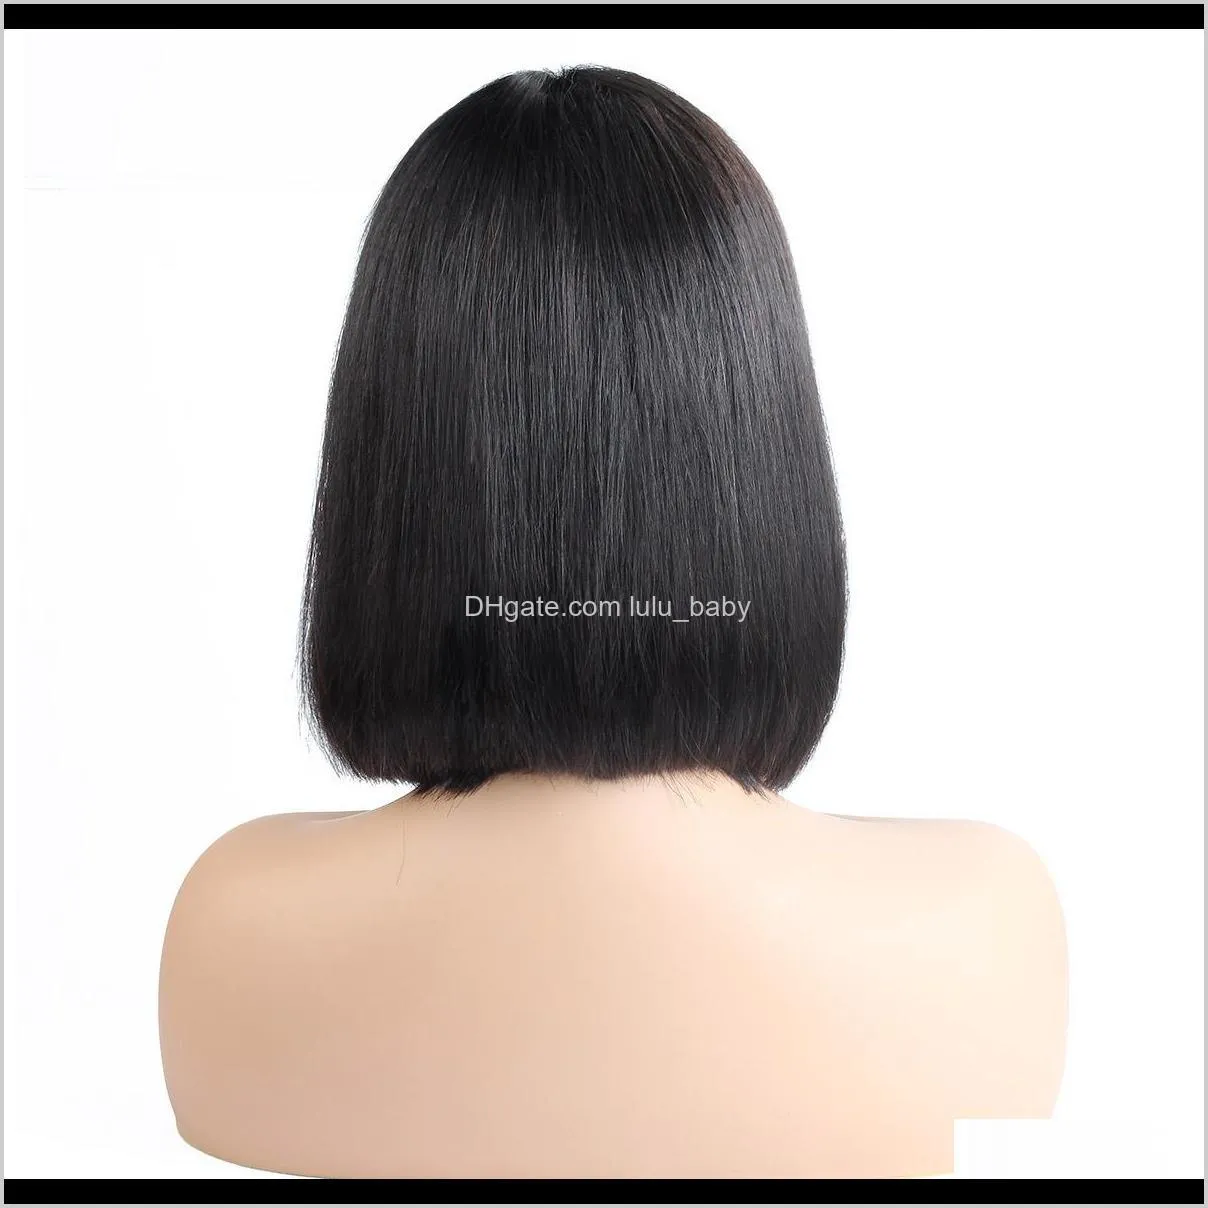 t lace short bob wig 8-14inch straight human hair wigs brazilian virgin human hair lace front wigs swiss lace frontal wig